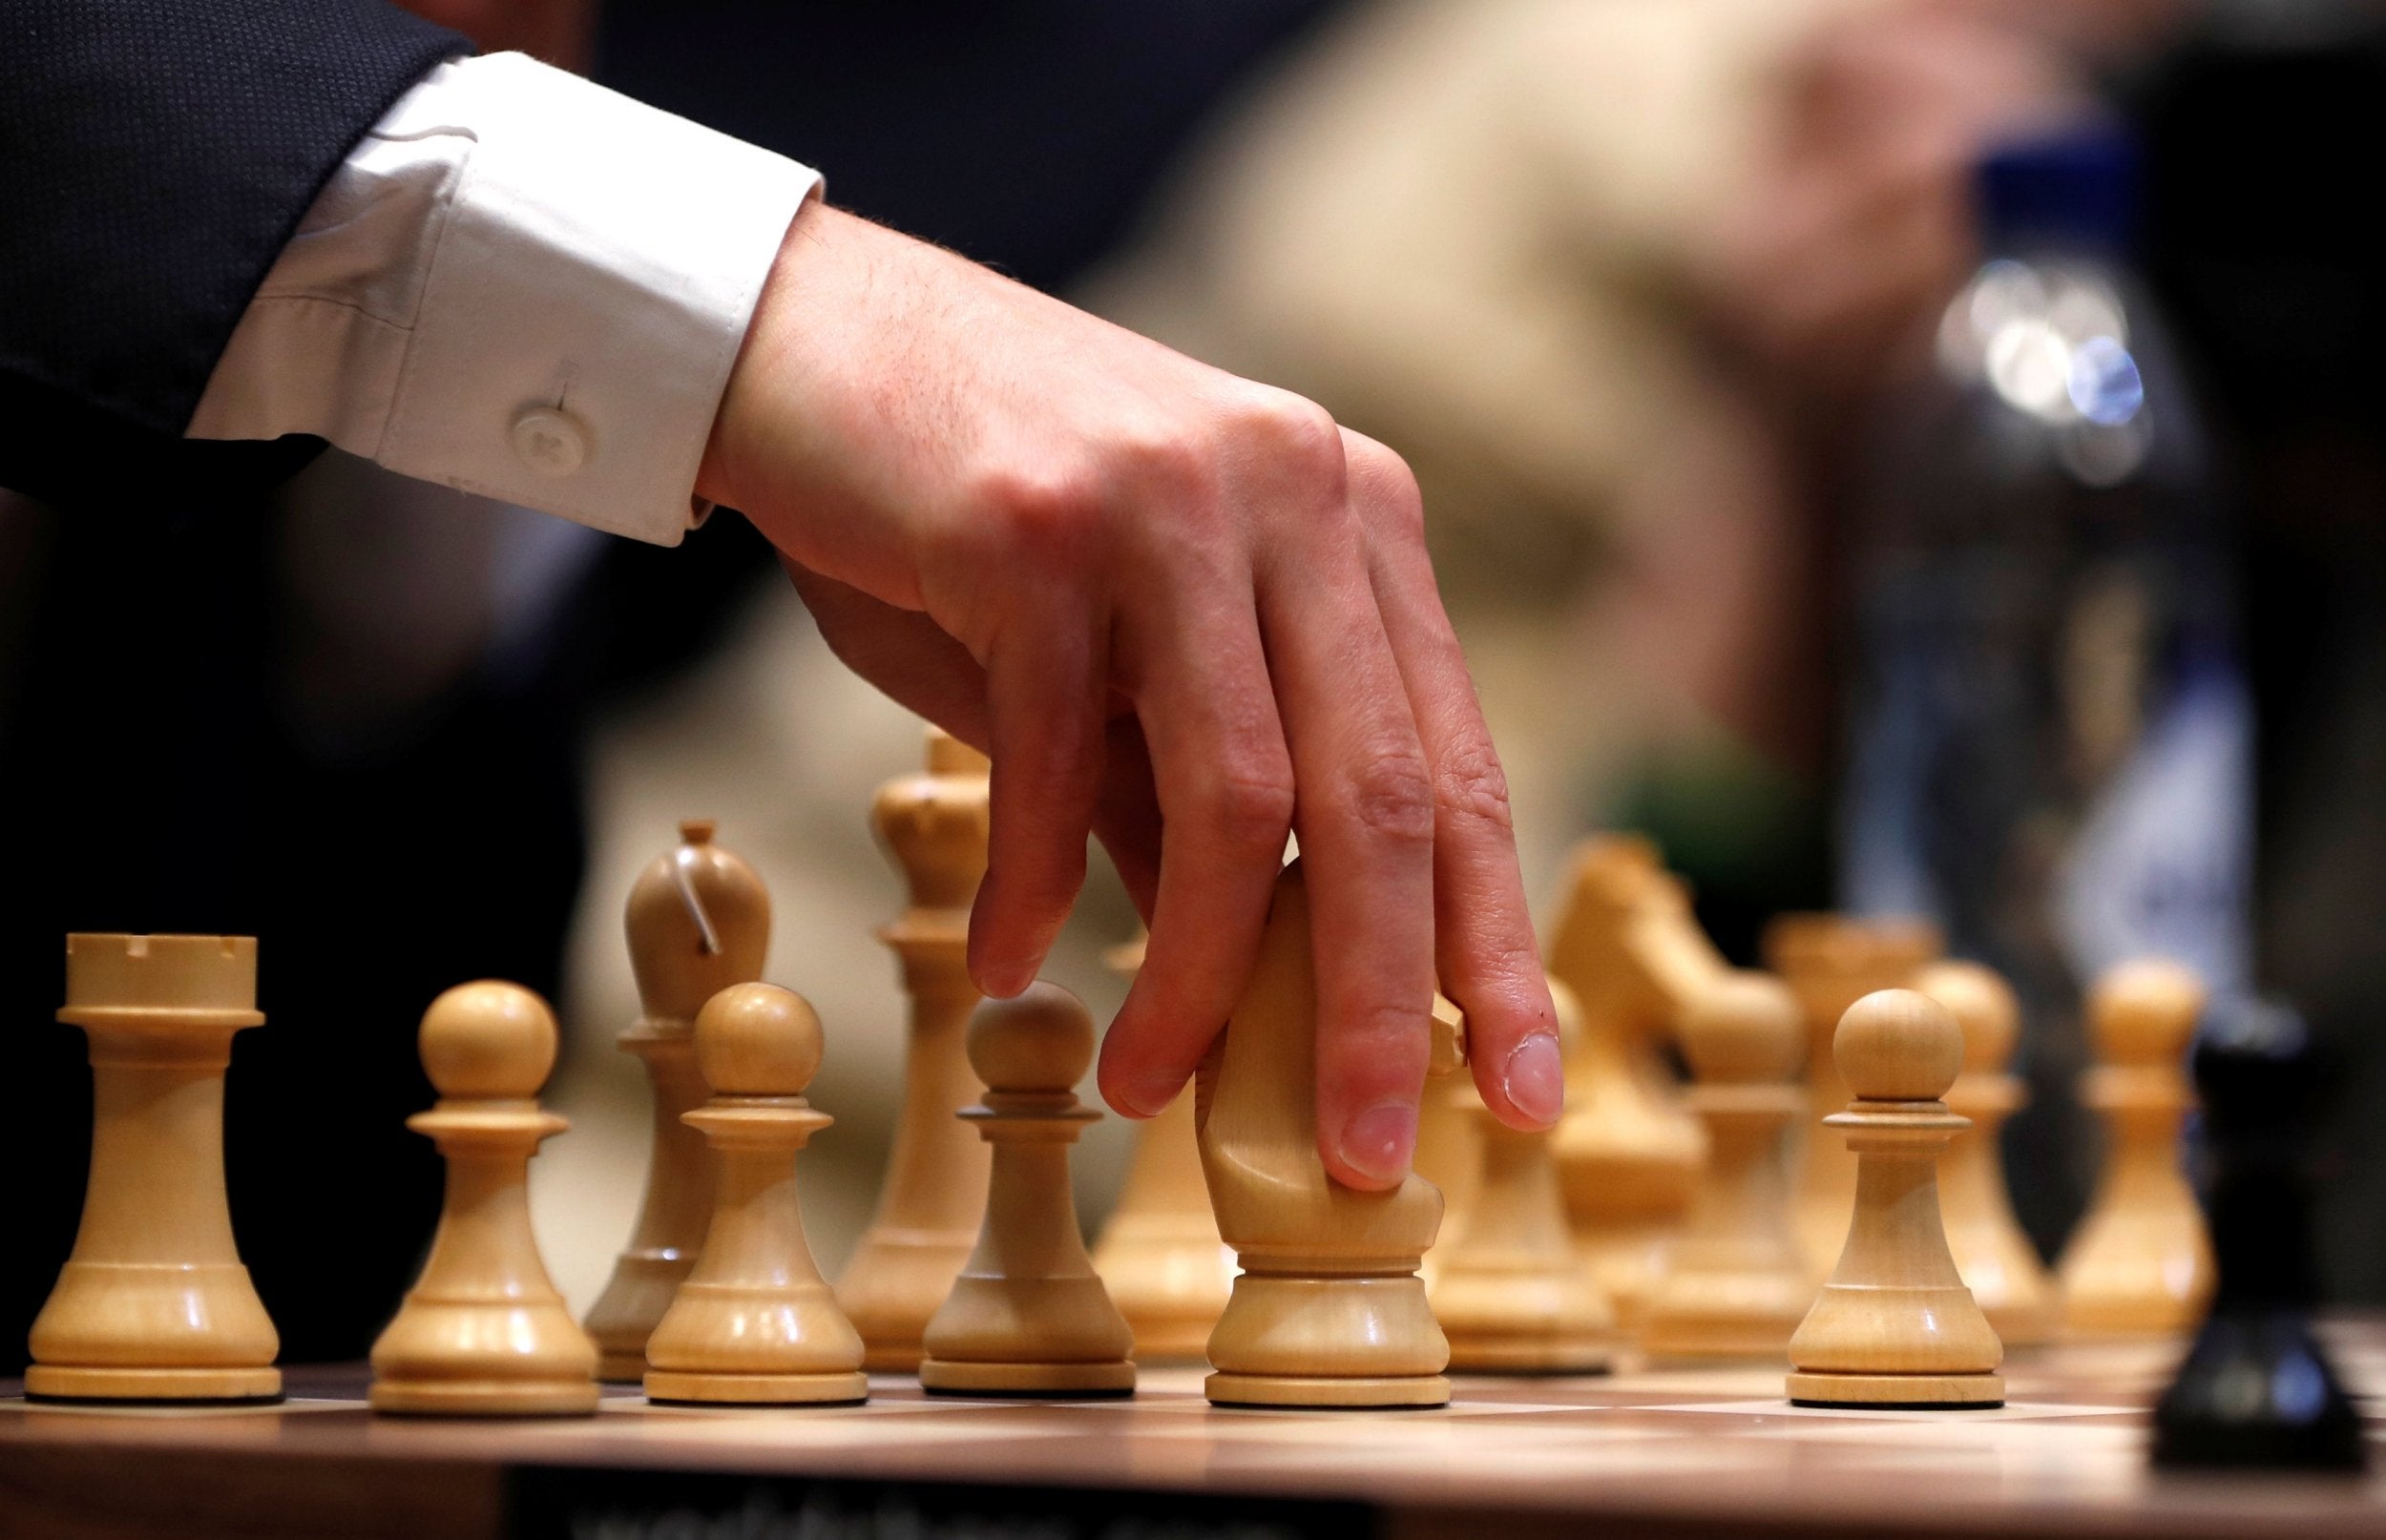 Russia will now host the World Blitz and Rapid Championship